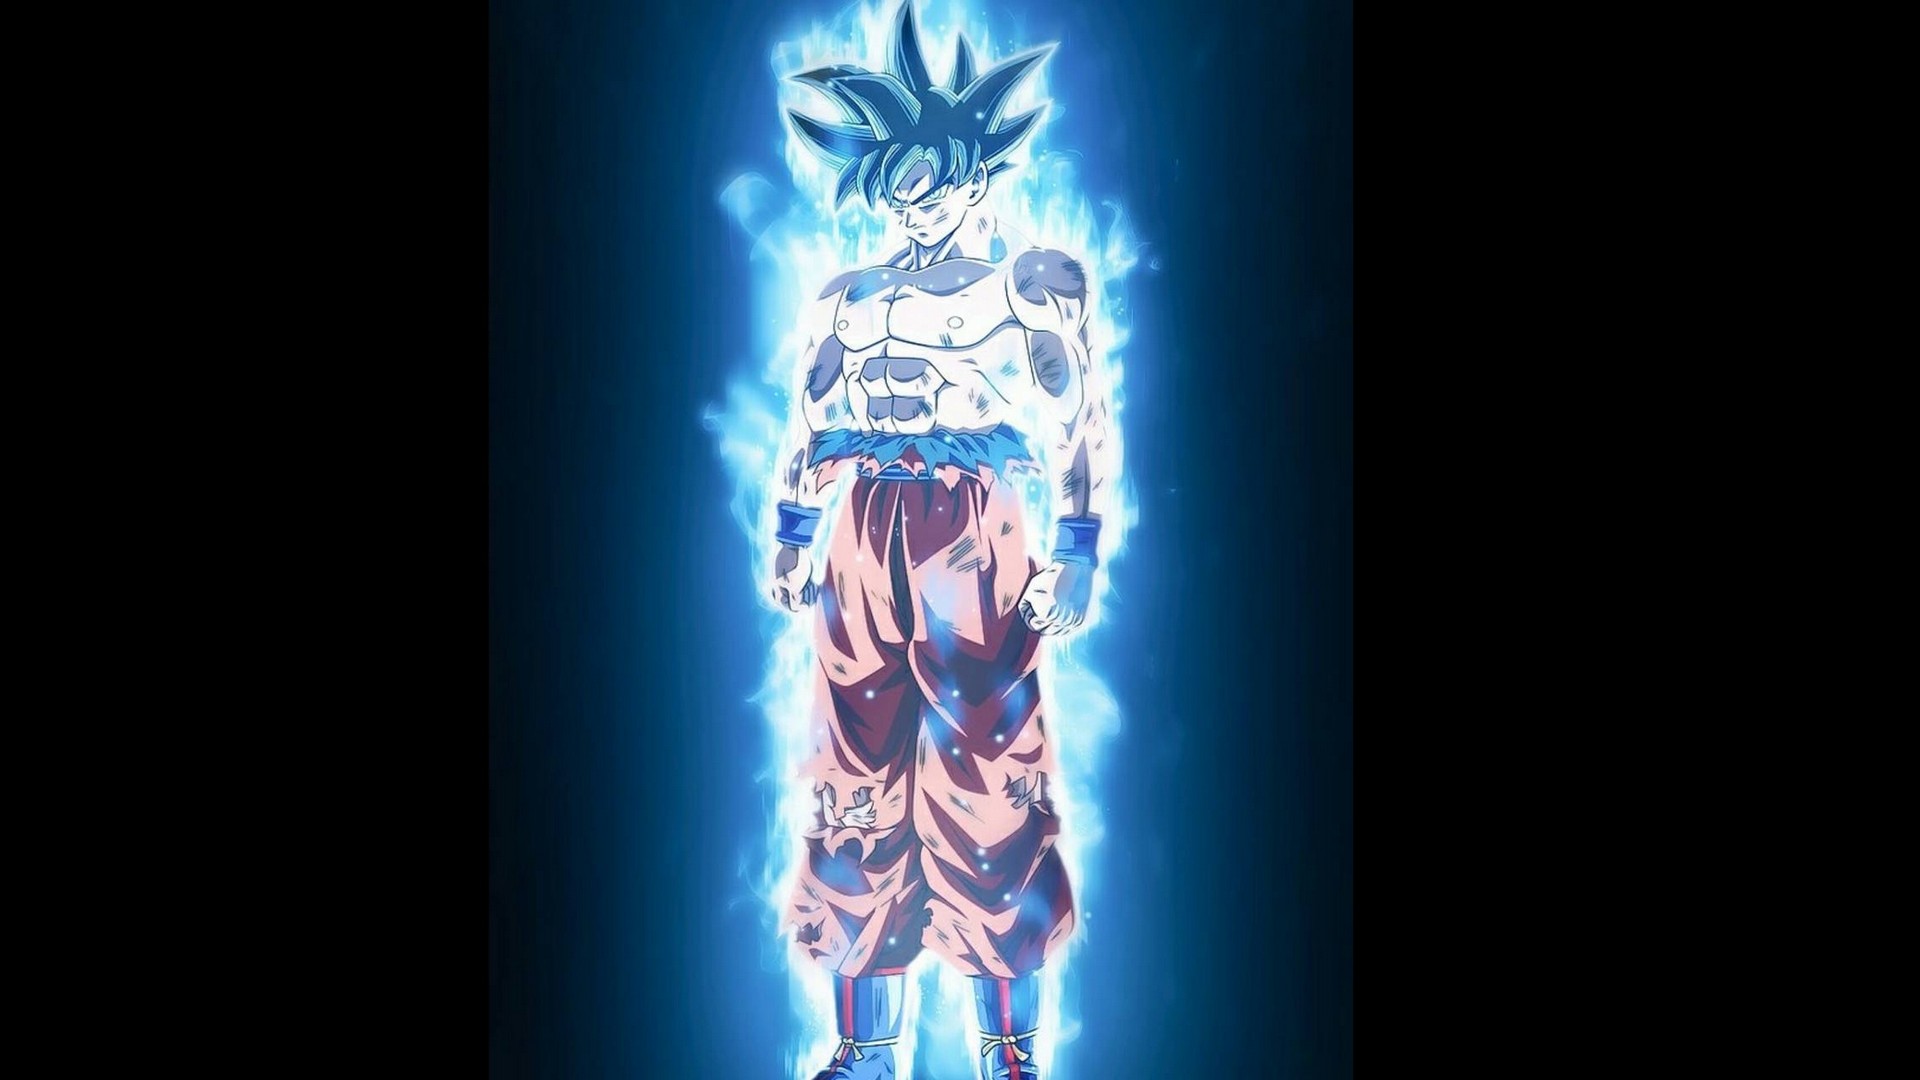 Goku Background Wallpaper HD With Resolution 1920X1080 pixel. You can make this wallpaper for your Desktop Computer Backgrounds, Mac Wallpapers, Android Lock screen or iPhone Screensavers